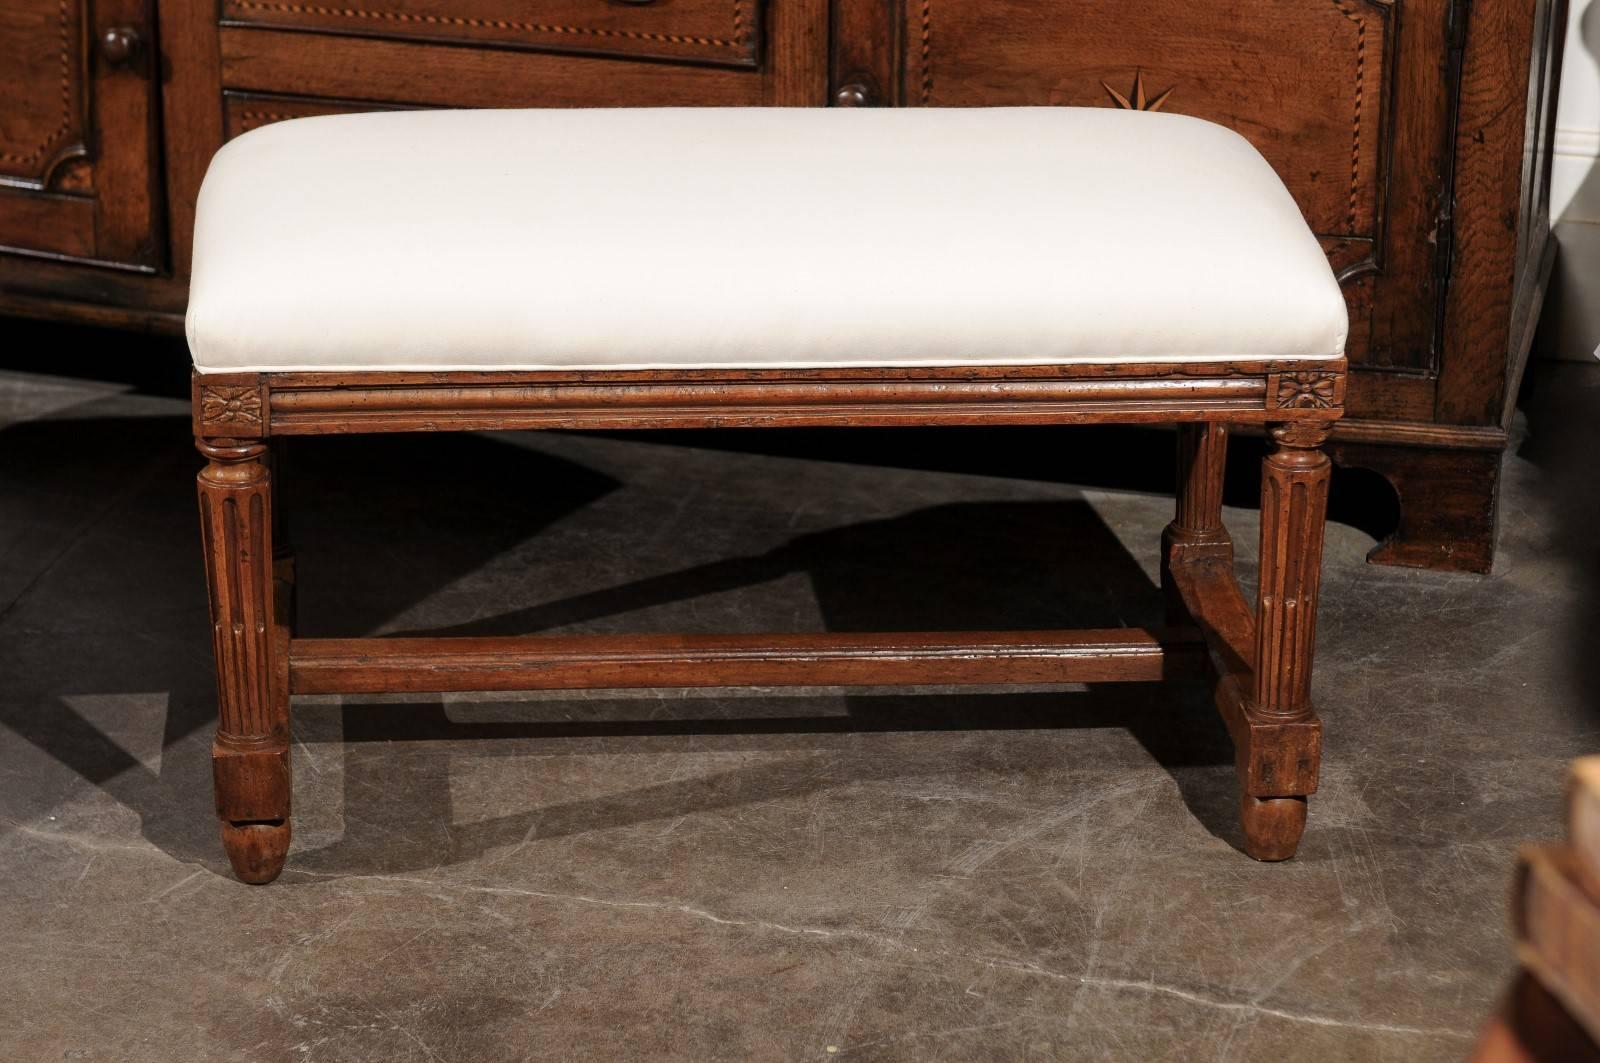 Pair of Italian Walnut Upholstered Wooden Benches from the Early 19th Century 1